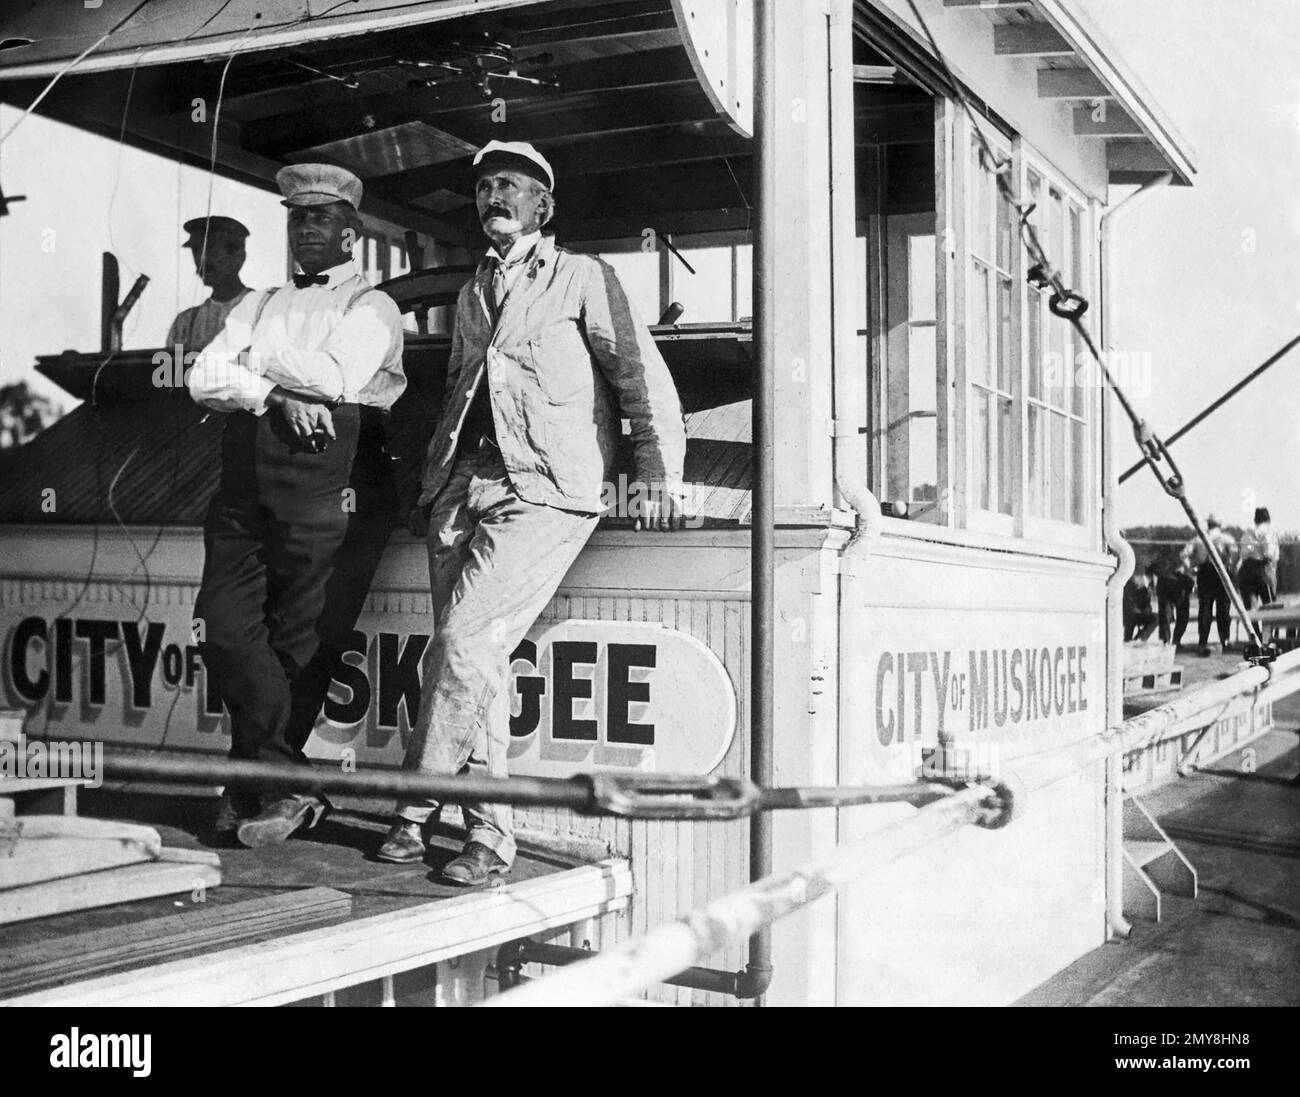 Wheel cabin of the 'City of Muskogee' steamboat on the Arkansas River, c1908. (USA) Stock Photo